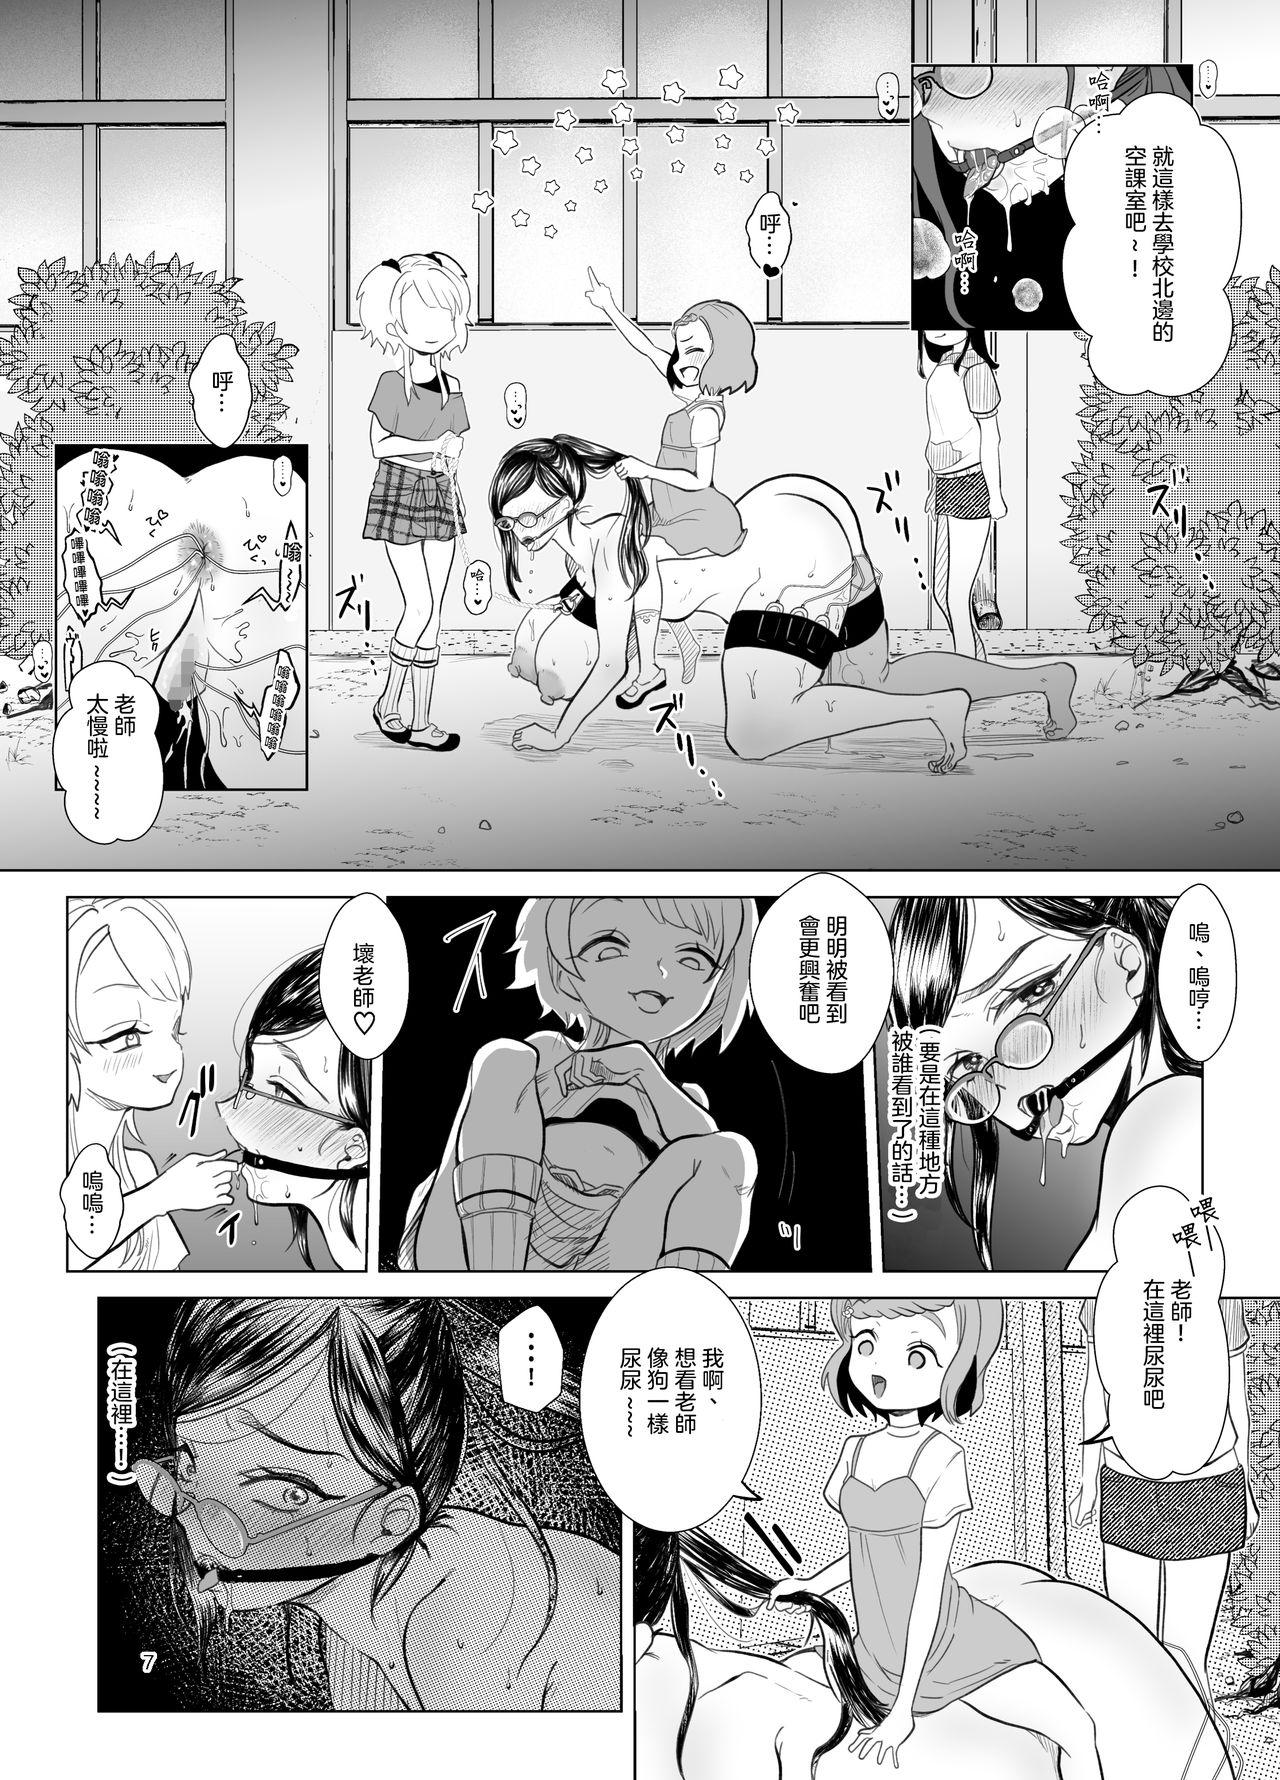 Piercing Do M Kyoushi to Oni Loli 丨抖M教師與鬼蘿莉 - Original Coeds - Page 8